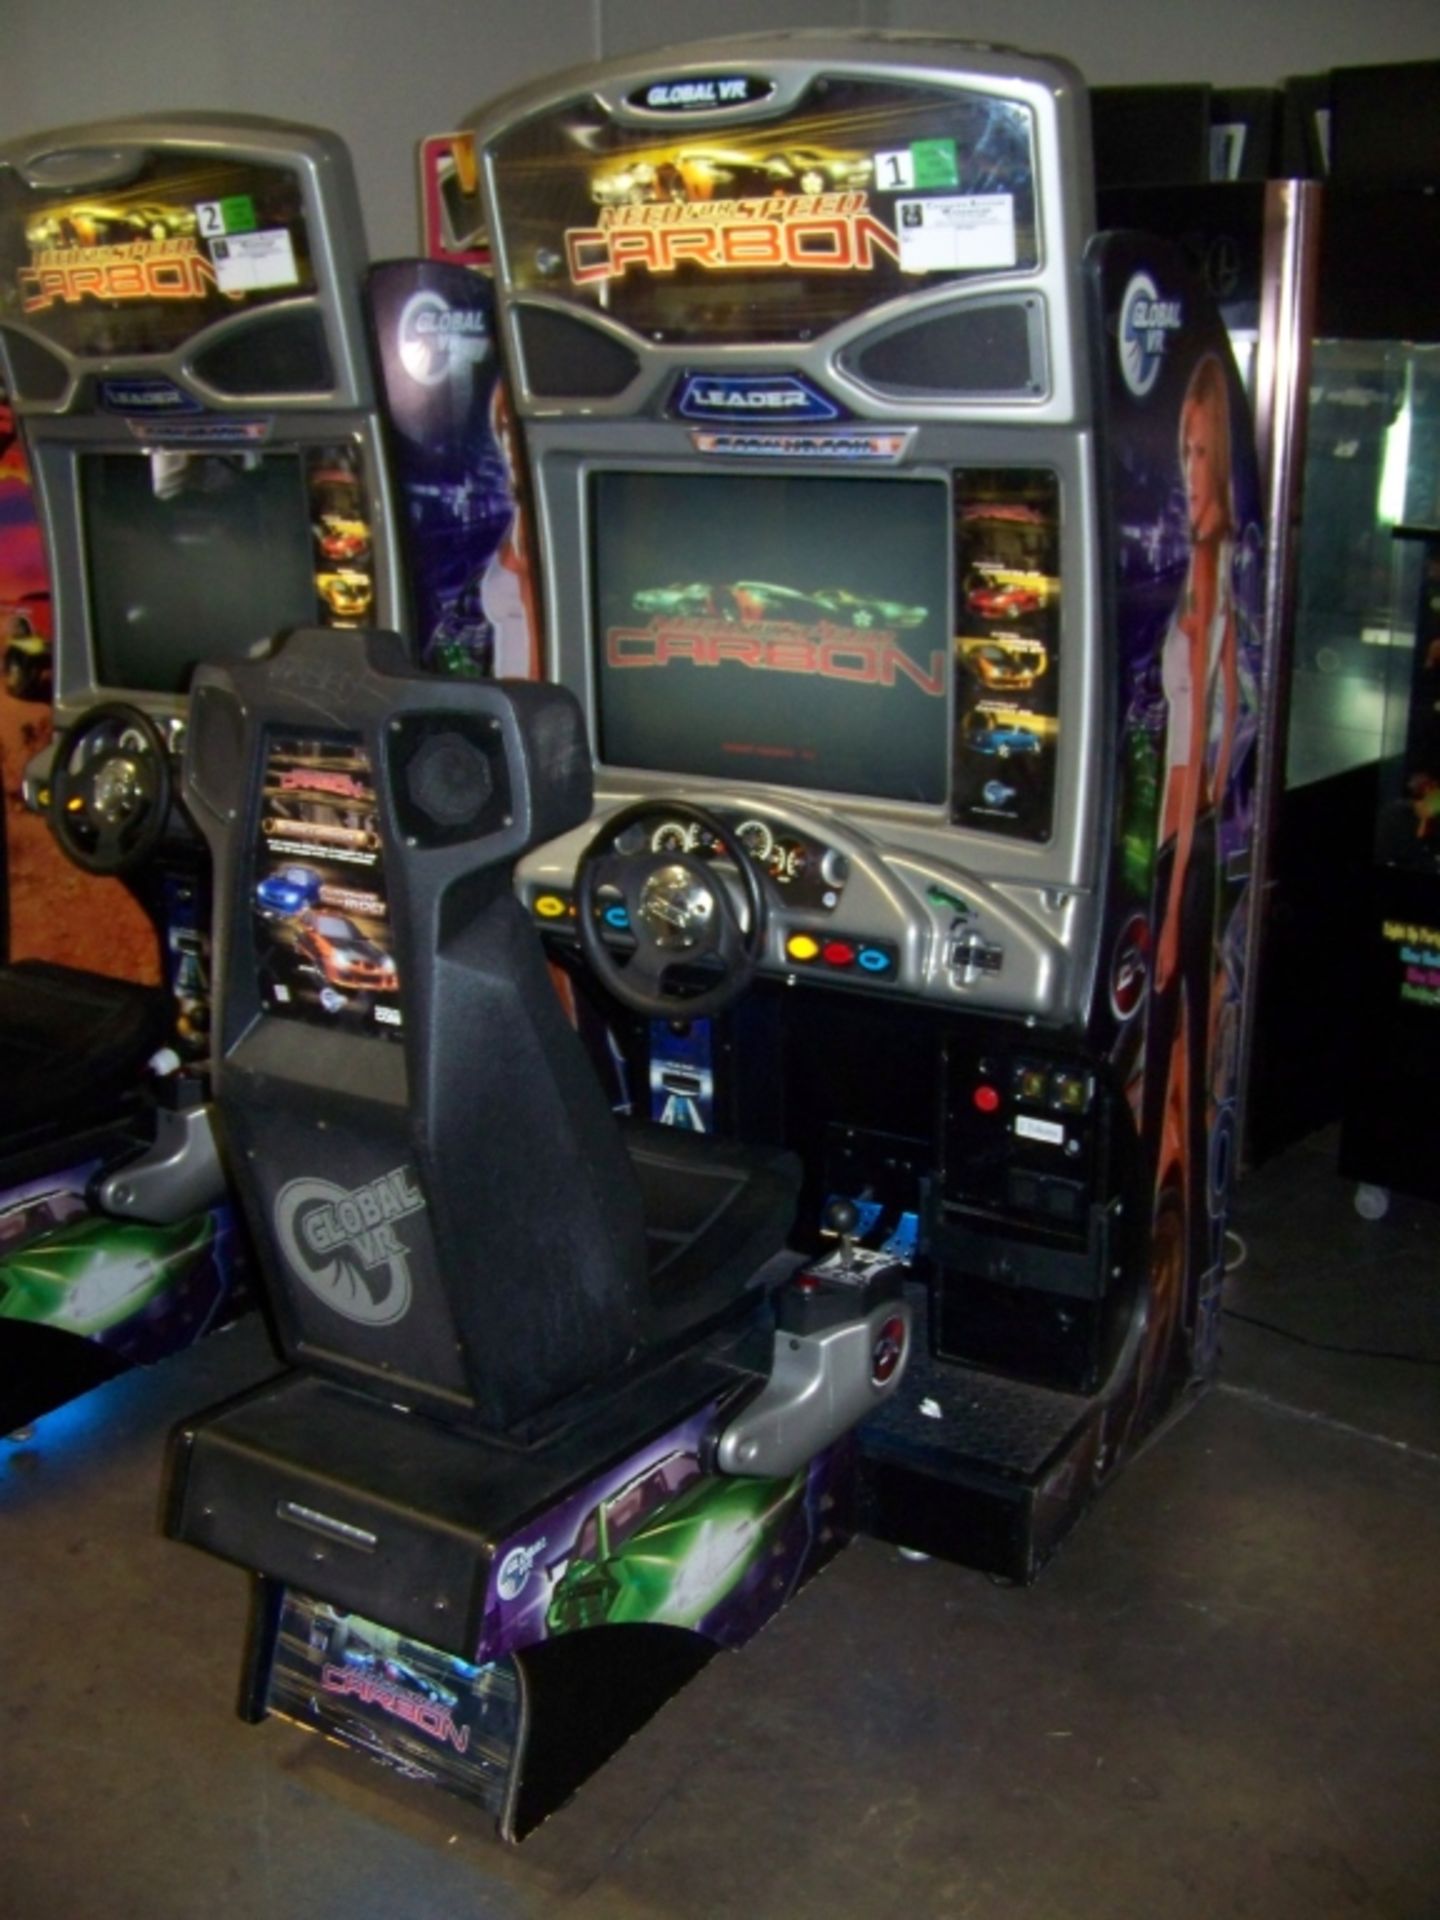 NEED FOR SPEED CARBON RACING ARCADE GAME